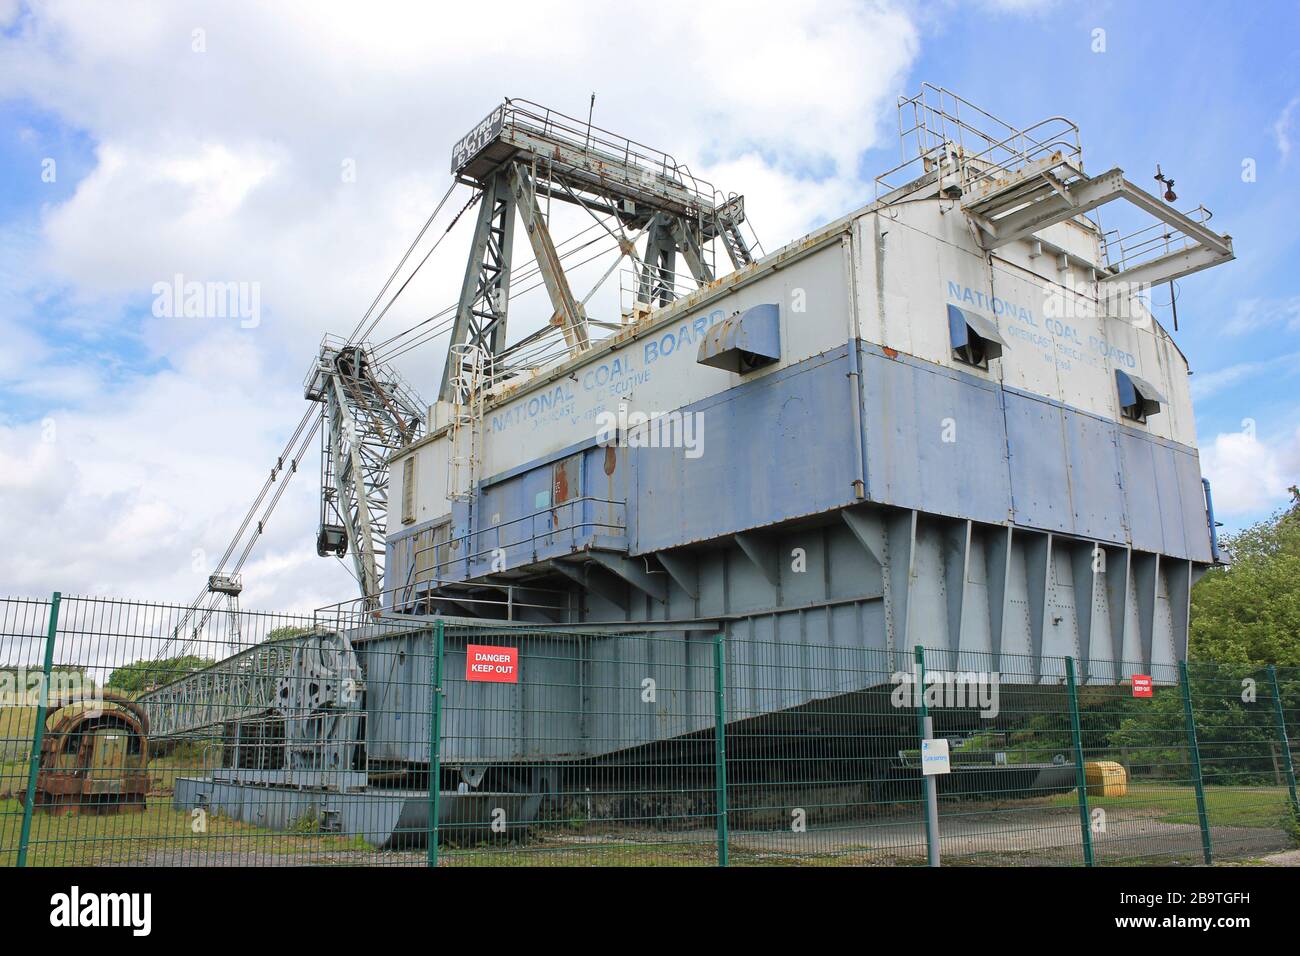 'Oddball', a Bucyrus Erie BE 1150 Walking Dragline Excavator, which was used in opencast/surface coal mining. Stock Photo